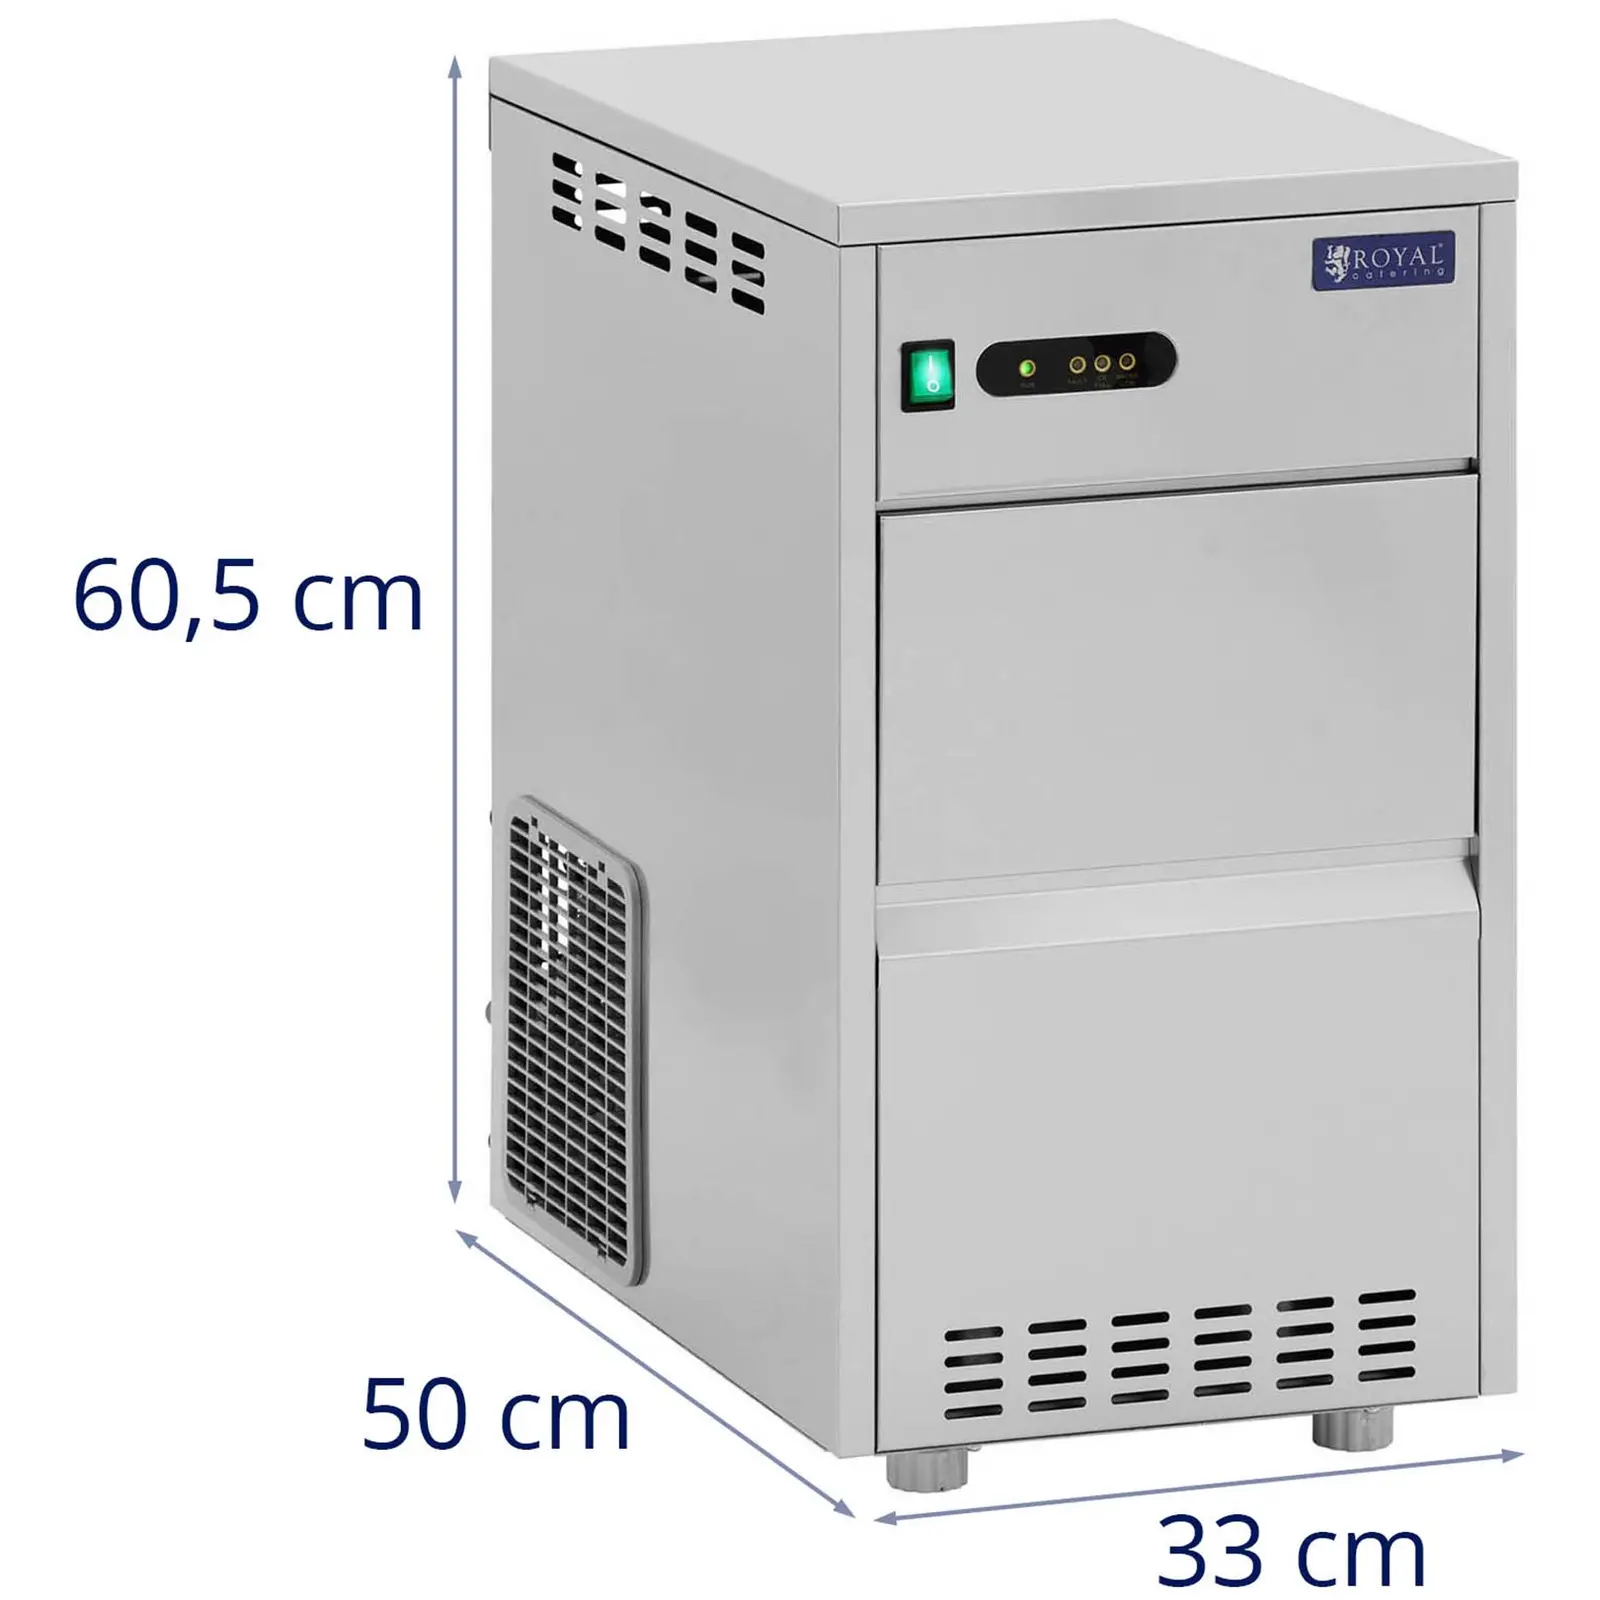 Factory second Crushed Ice Machine - 25 kg / 24 h